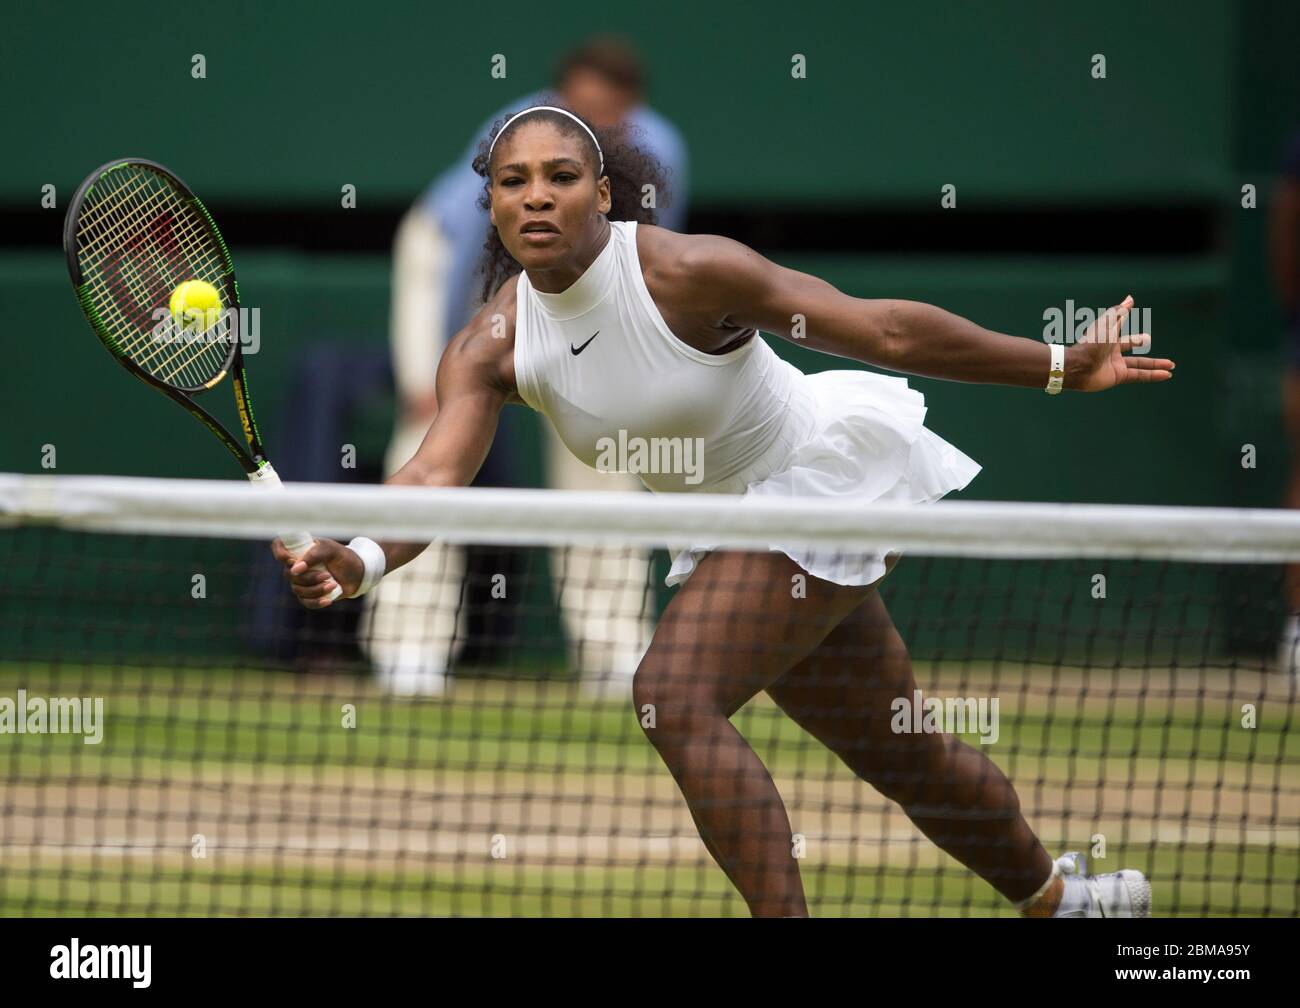 9th July 2016, Centre Court, Wimbledon, London: Serena Williams (USA) in  action against Angelique Kerber, (GER) during the Women's Singles Final  Stock Photo - Alamy